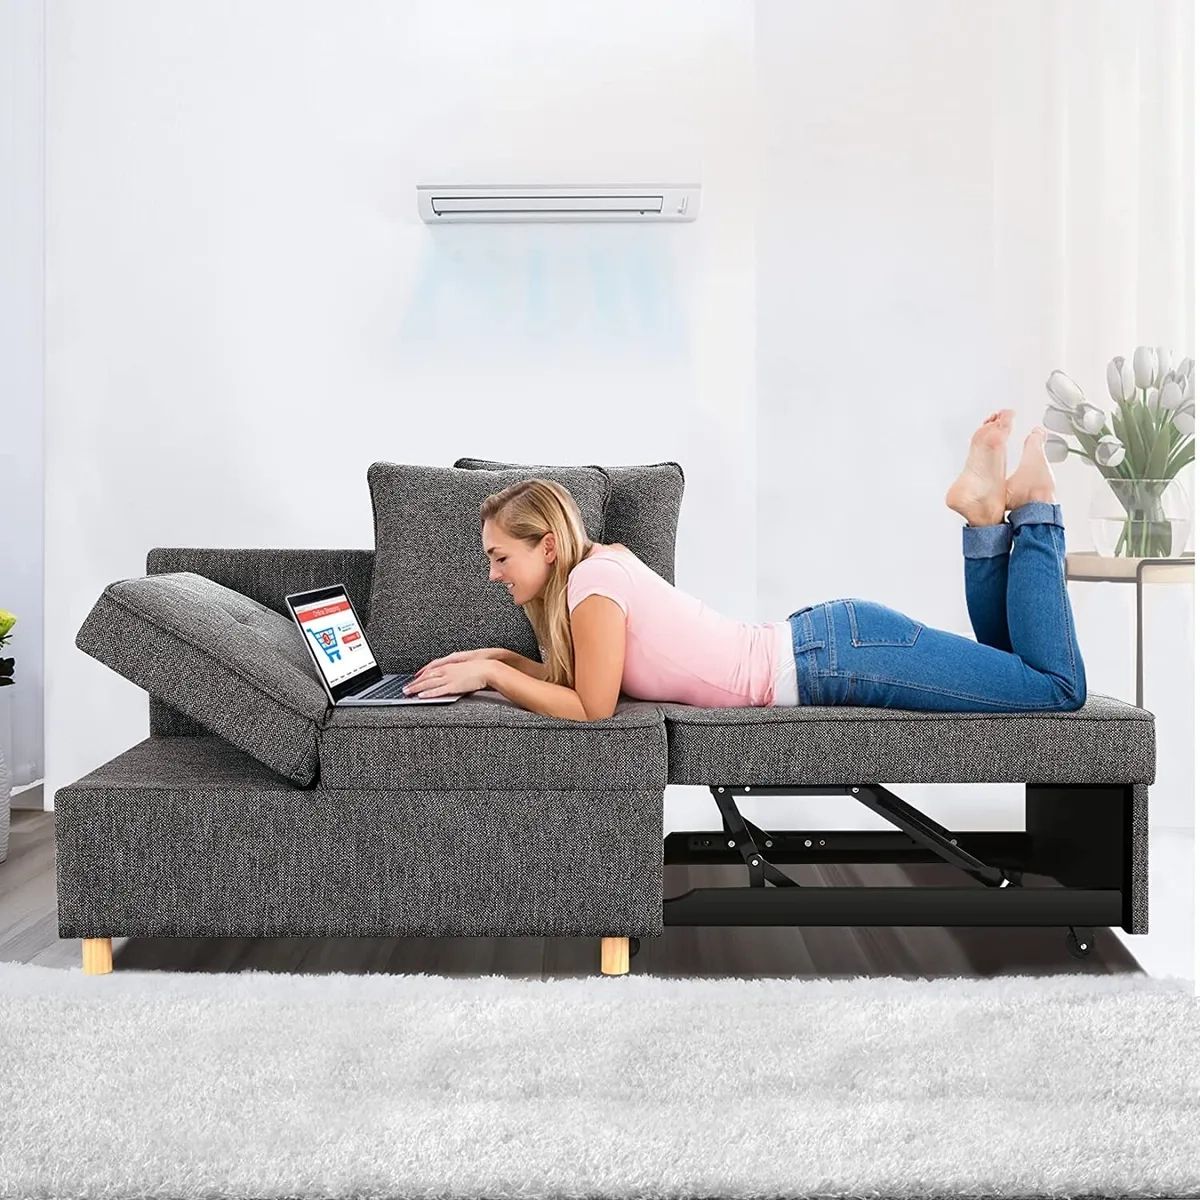 ⭐Folding Ottoman Sofa Bed Convertible Chair 4 In 1 Multi Function Sleeper  Sofa~⭐ | Ebay Throughout 4 In 1 Convertible Sleeper Chair Beds (Photo 11 of 15)